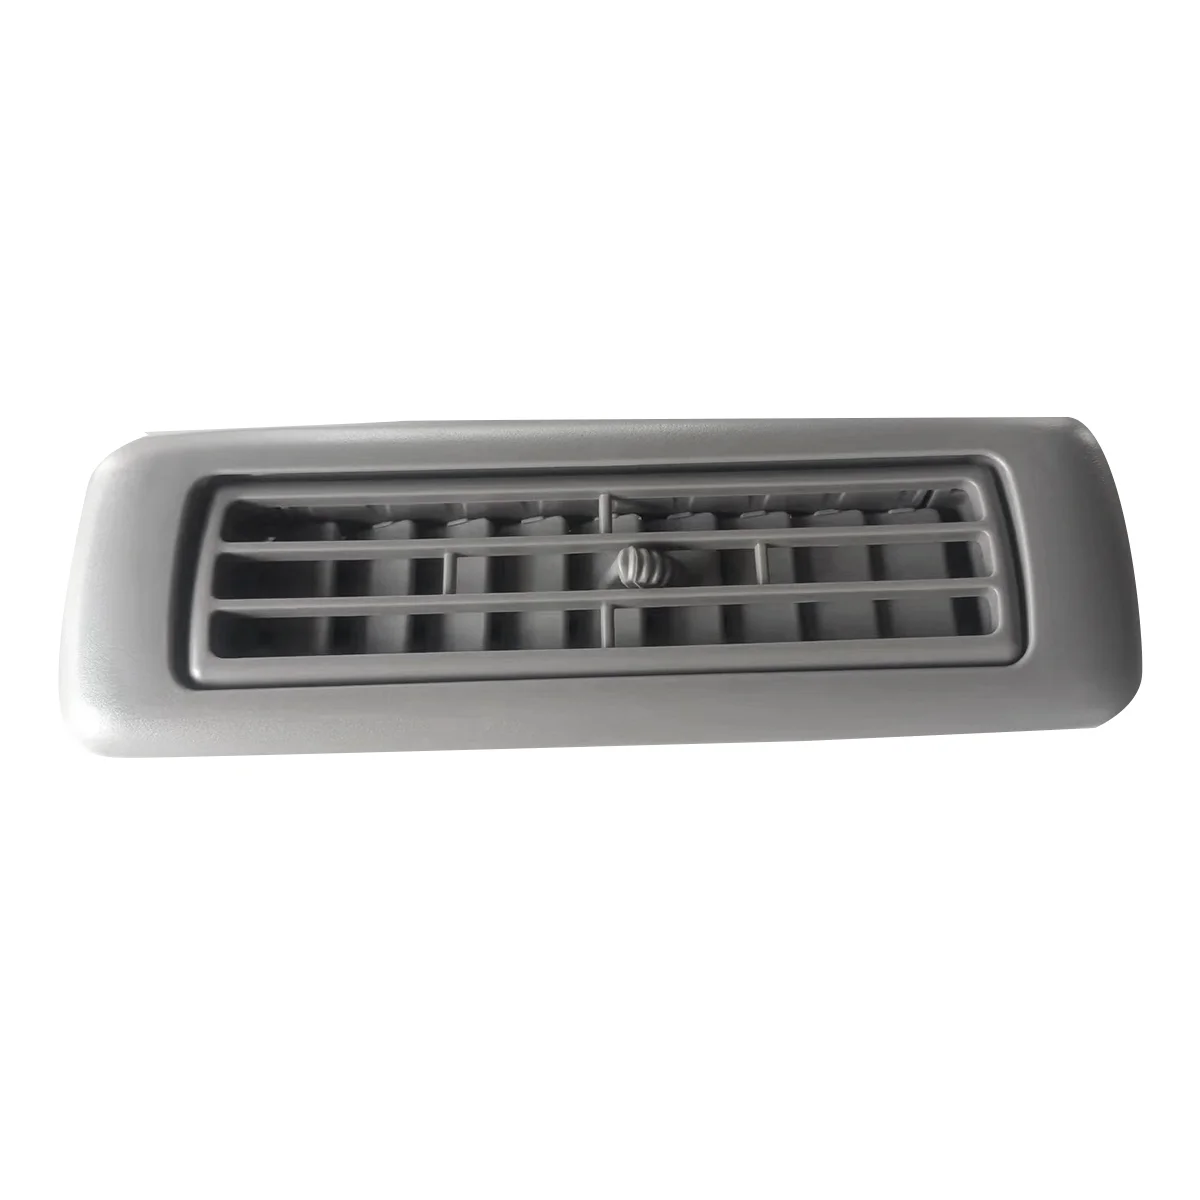 

Roof Rear Air Vent Grille 62985-60010-A0 for Toyota Prado Lexus GX470 2002-2009 Grey Side Air Outlet Nozzle